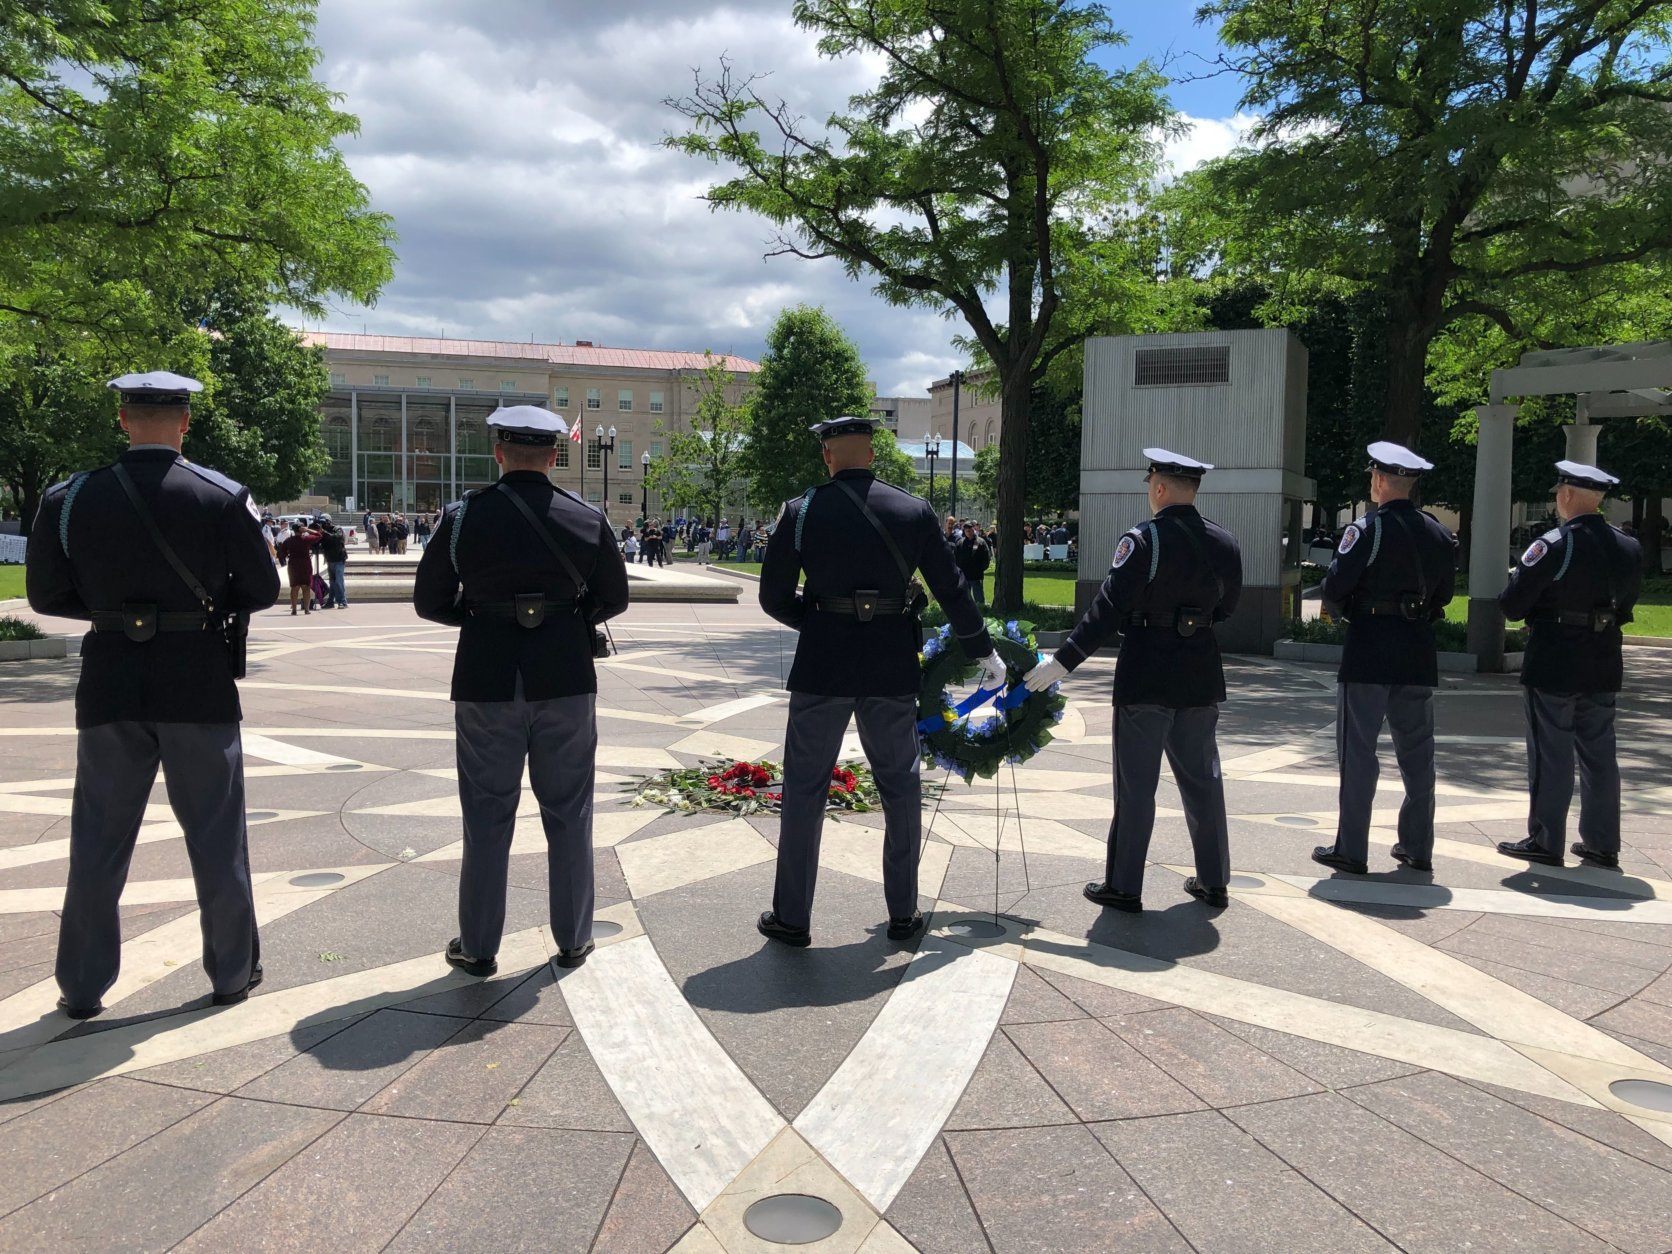 Law enforcement officers stand guard during a vigil Tuesday, May 14, 2019, to honor fallen officers.
(WTOP/Kristi King)